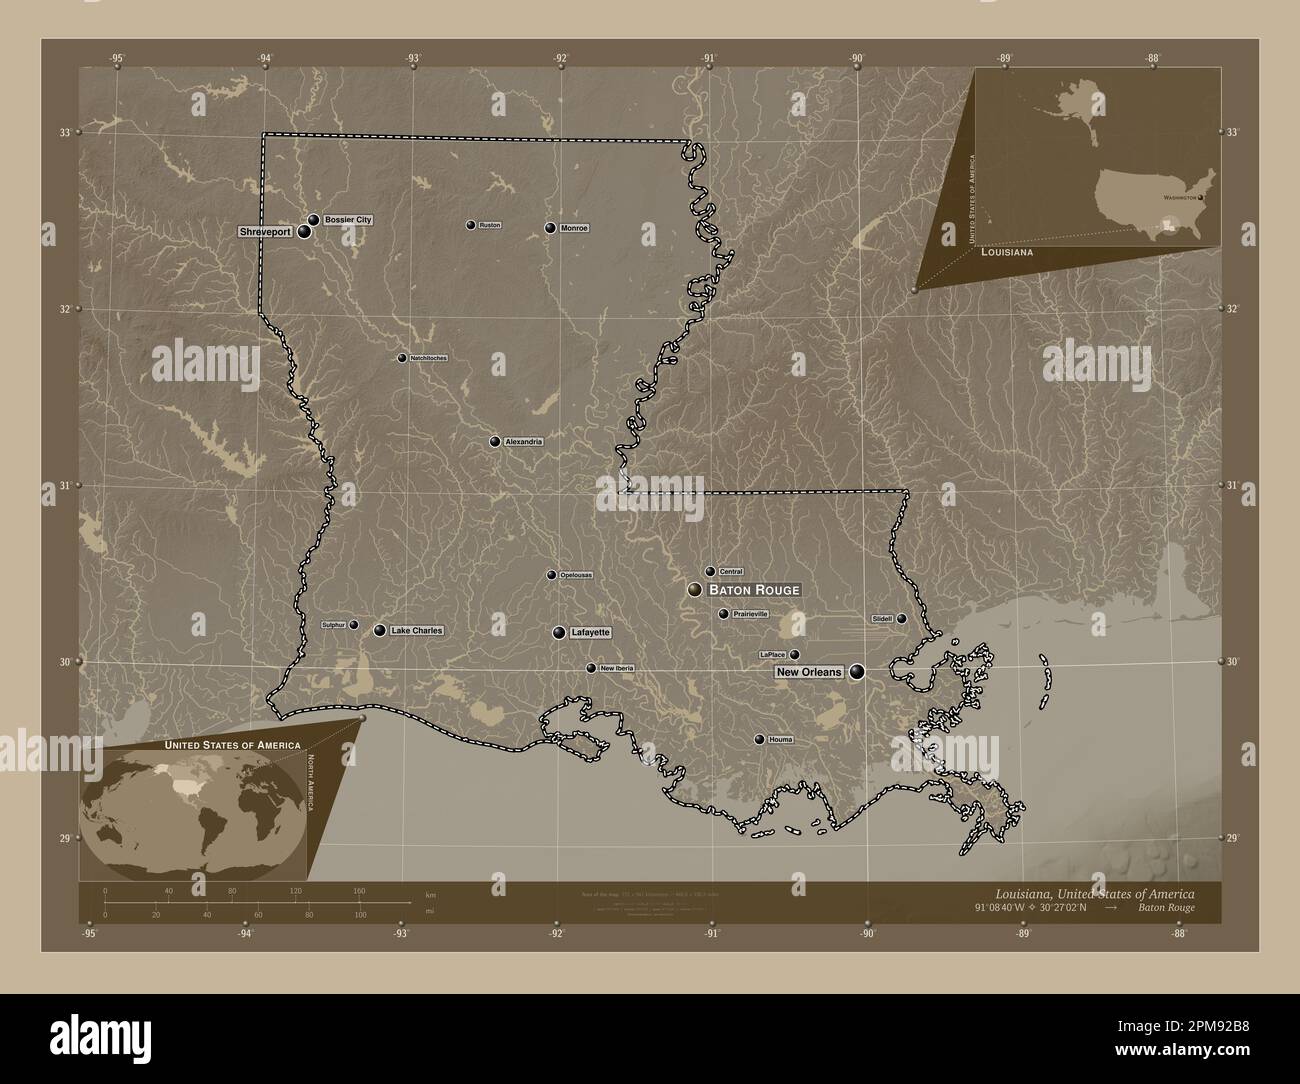 Louisiana, state of United States of America. Elevation map colored in sepia tones with lakes and rivers. Locations and names of major cities of the r Stock Photo